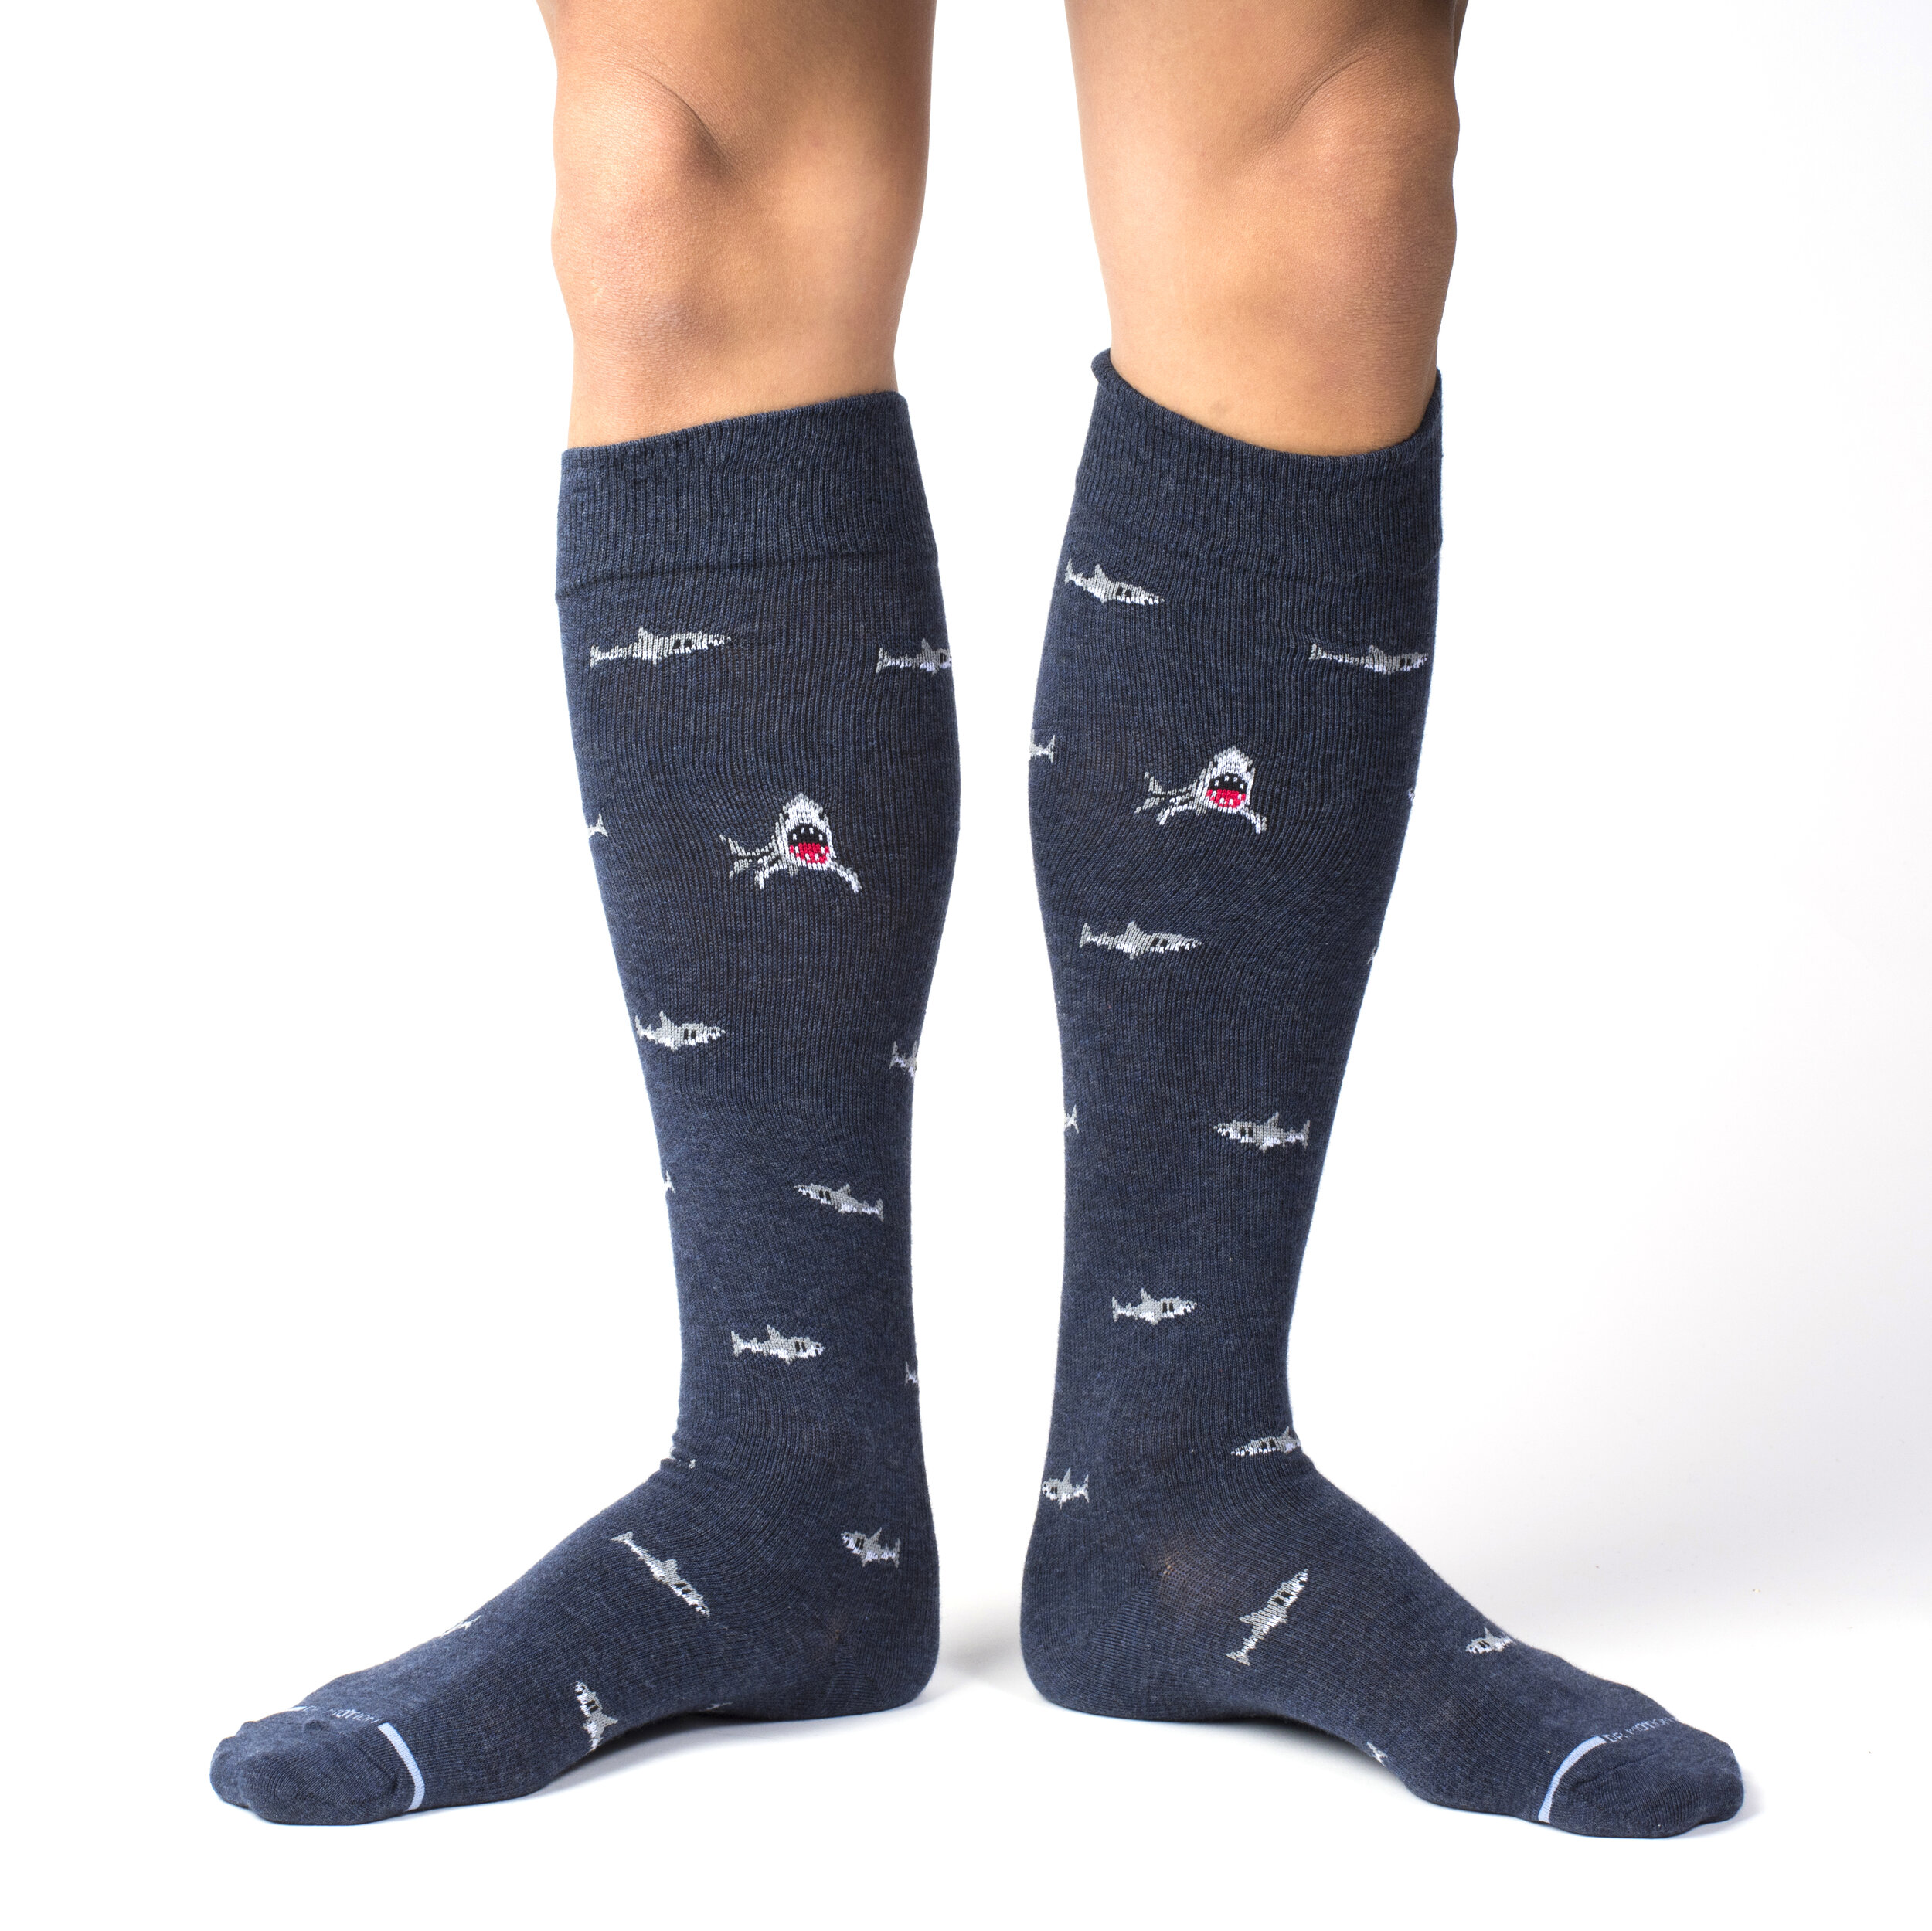 Compression Socks for Retail Workers